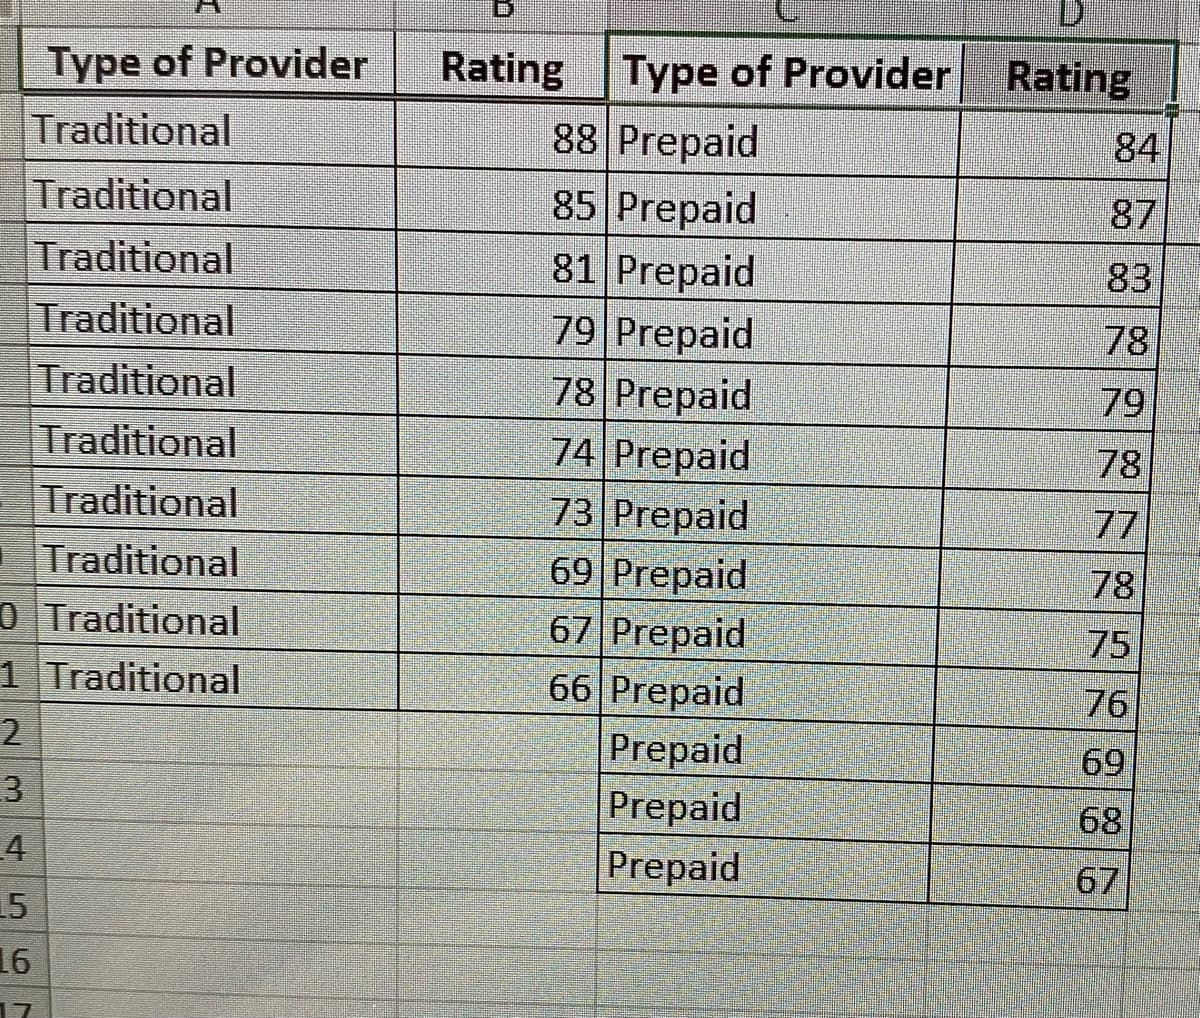 Type of Provider
Traditional
Traditional
Rating
Type of Provider
Rating
88 Prepaid
85 Prepaid
81 Prepaid
79 Prepaid
78 Prepaid
74 Prepaid
84
87
Traditional
83
Traditional
78
Traditional
79
Traditional
78
Traditional
73 Prepaid
77
Traditional
0 Traditional
69 Prepaid
67 Prepaid
66 Prepaid
78
75
1 Traditional
76
2
Prepaid
Prepaid
Prepaid
69
3
68
4
67
15
16
